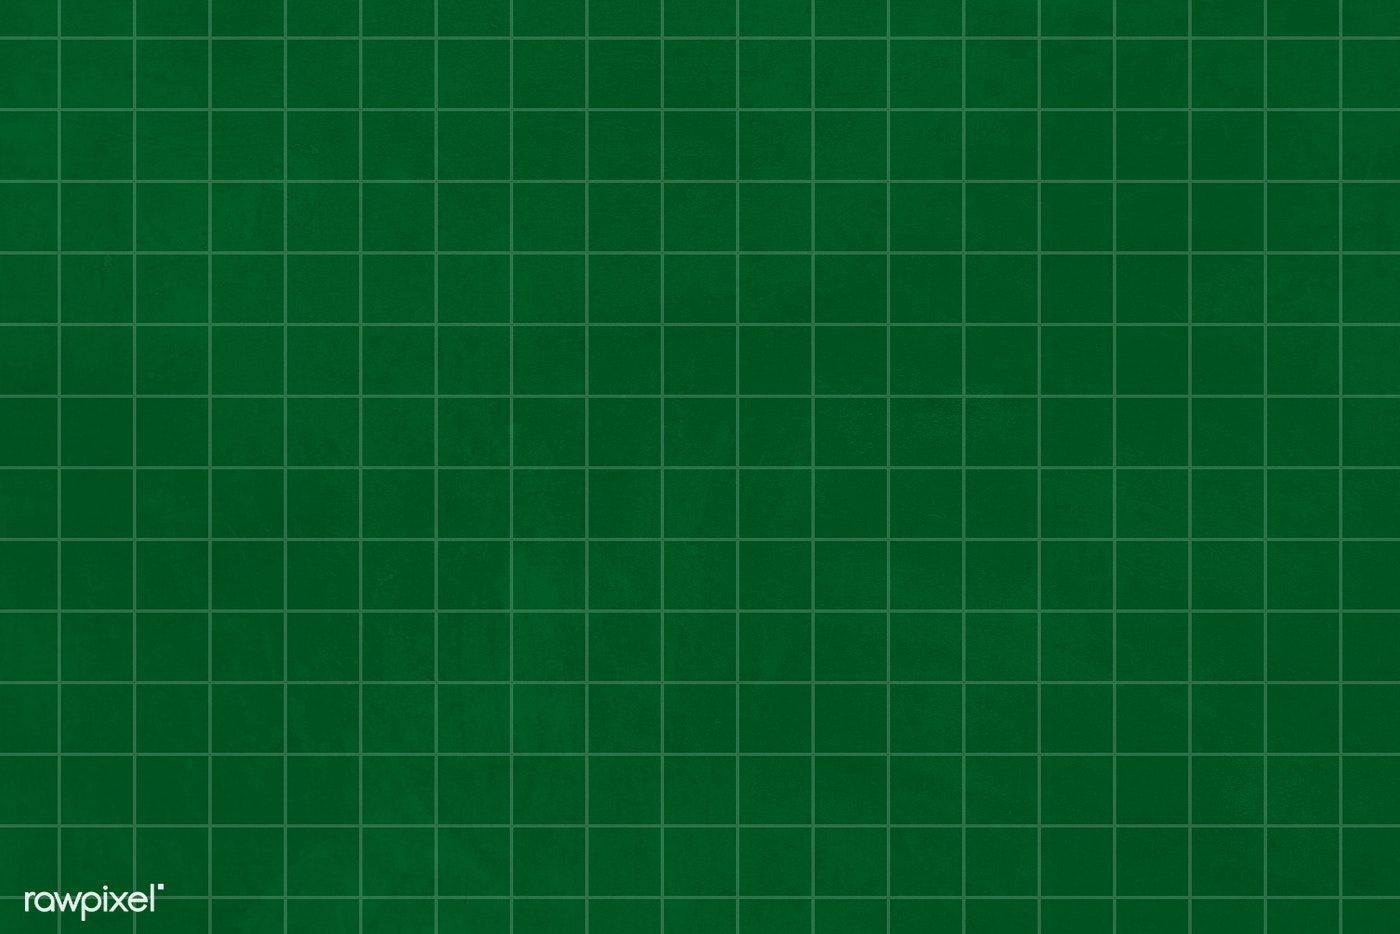 Grid pattern on a dark green paper textured background. free image by rawpixel.com / marinemynt. การวาดคาแรคเตอร์